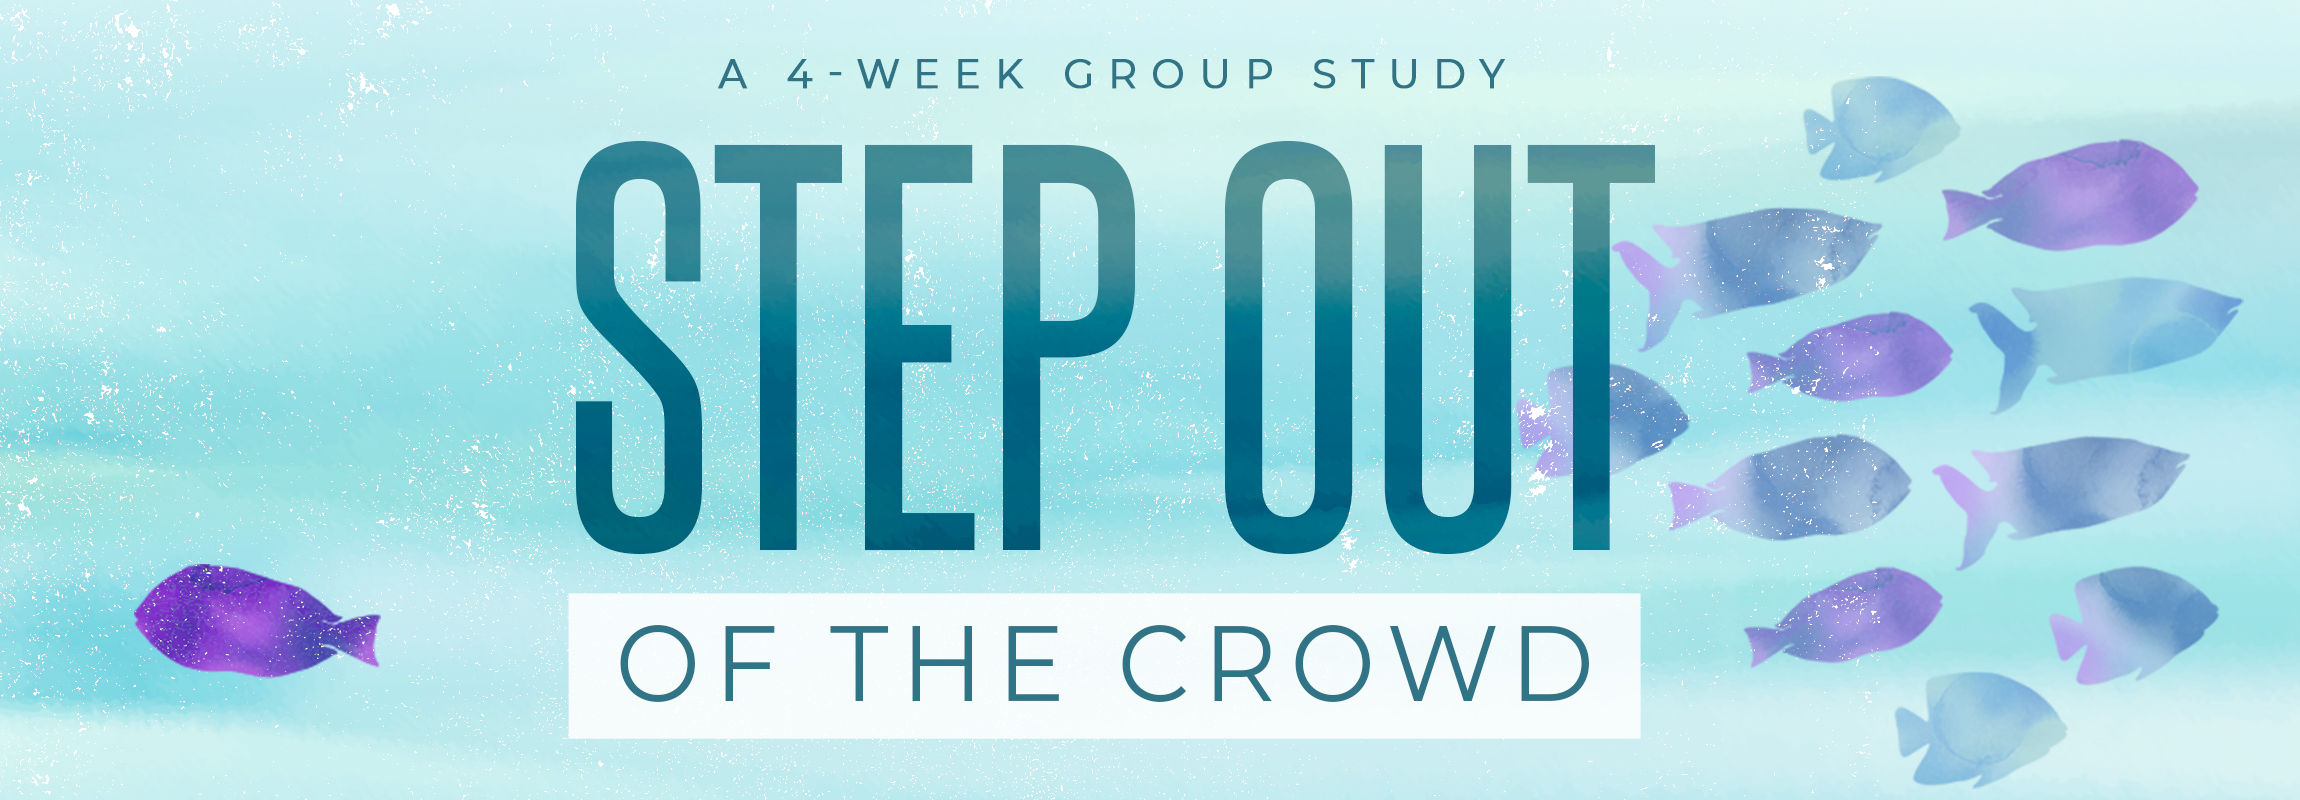 Step Out of the Crowd Small Group Study